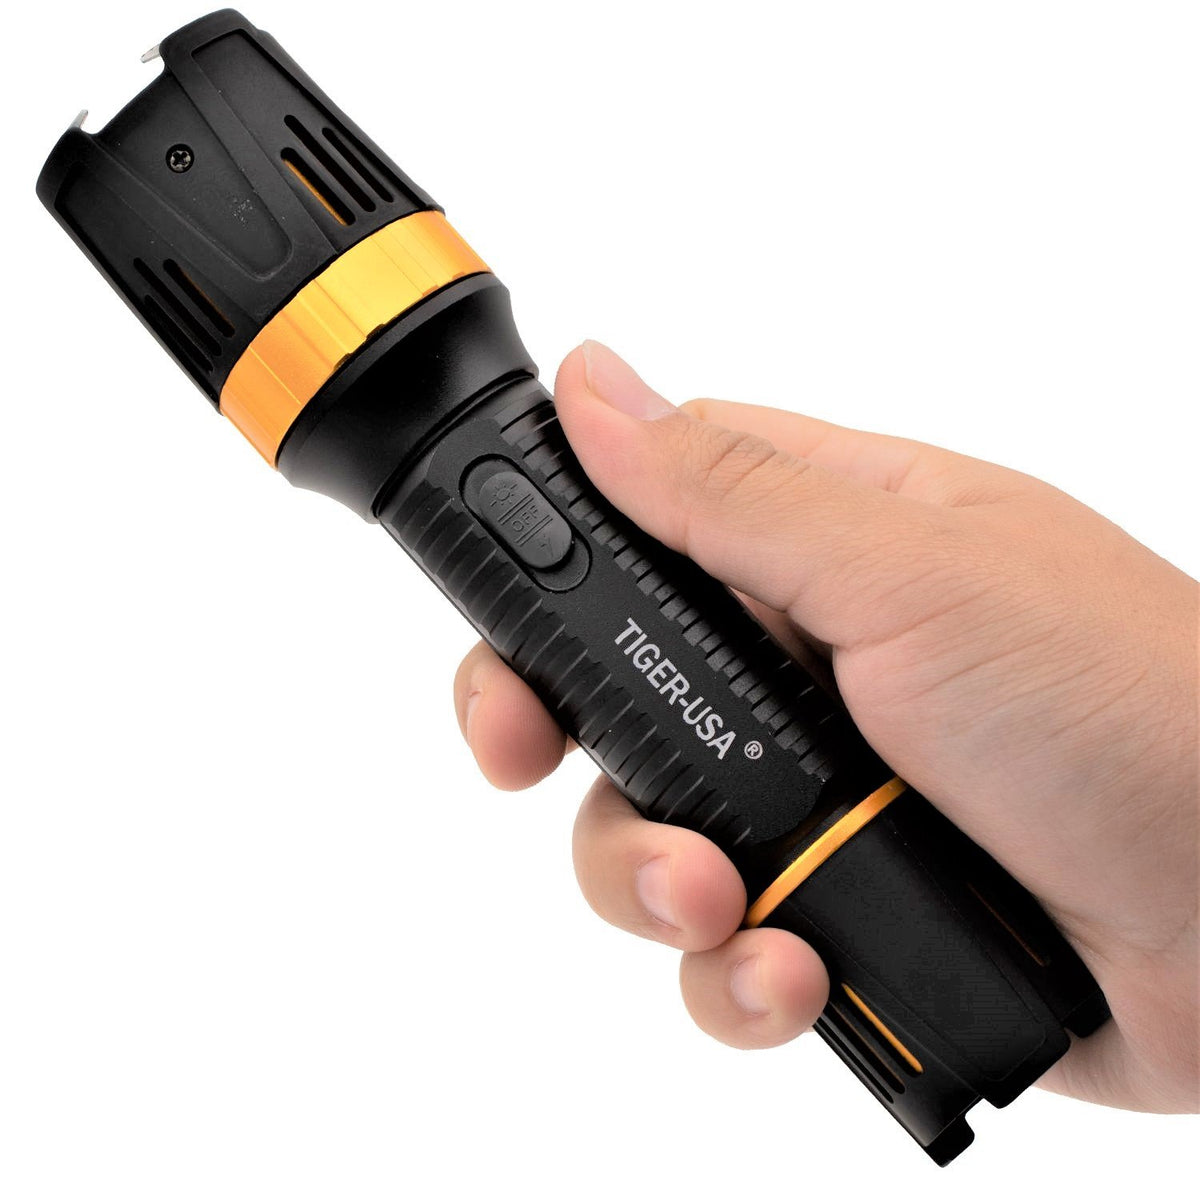 90M Superstore The Security Home Gun Flashlight - Rechargeable Police Tiger-USA Xtreme® Stun